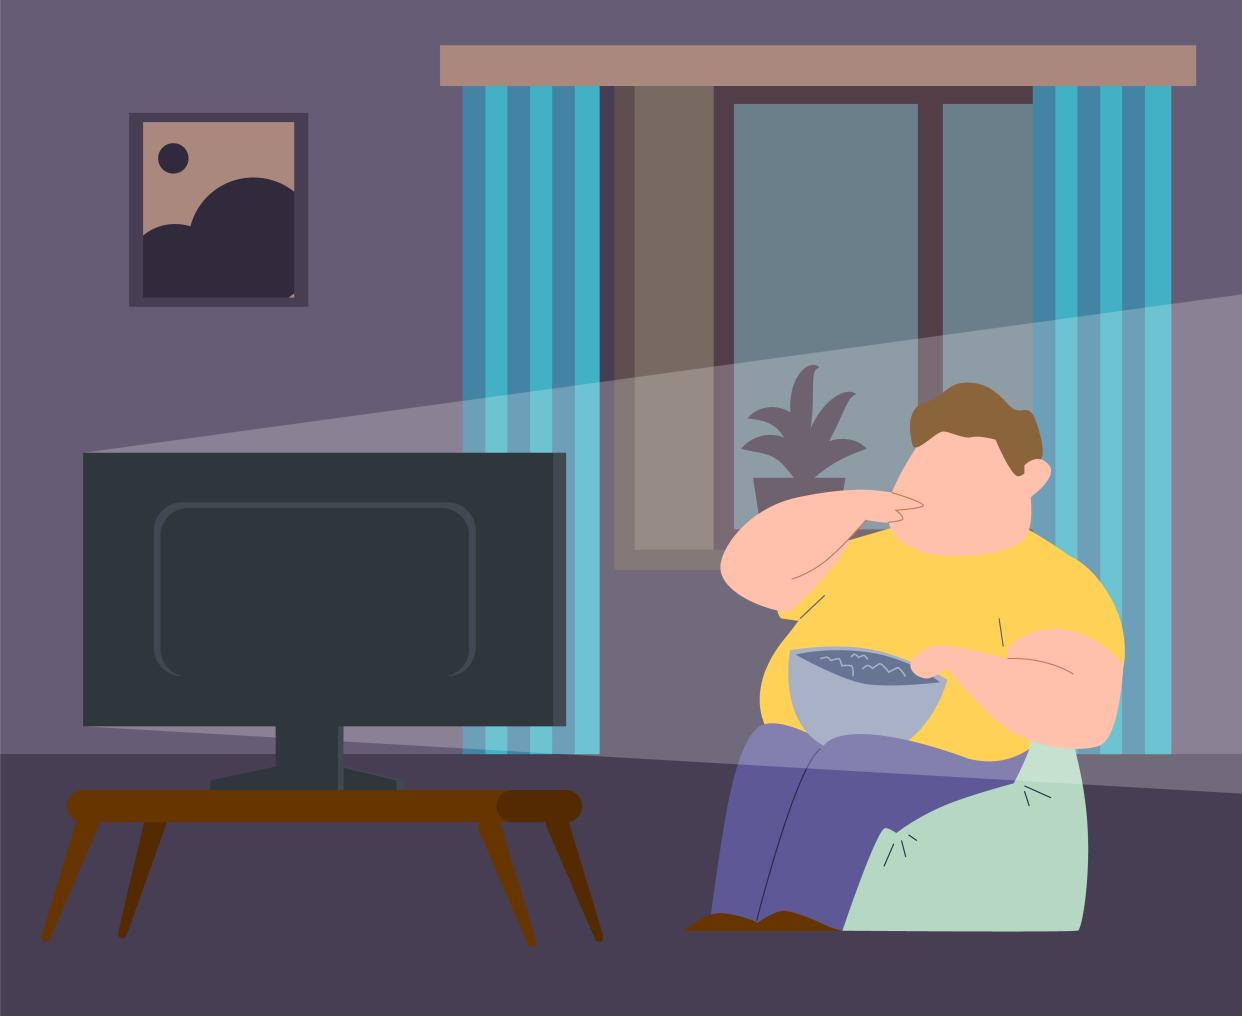 Eating addiction. Fat man sitting in chair, waching tv and eating fast food. Concept of obesity, binge eating disorder and unhealthy lifestyle. Flat cartoon vector illustration